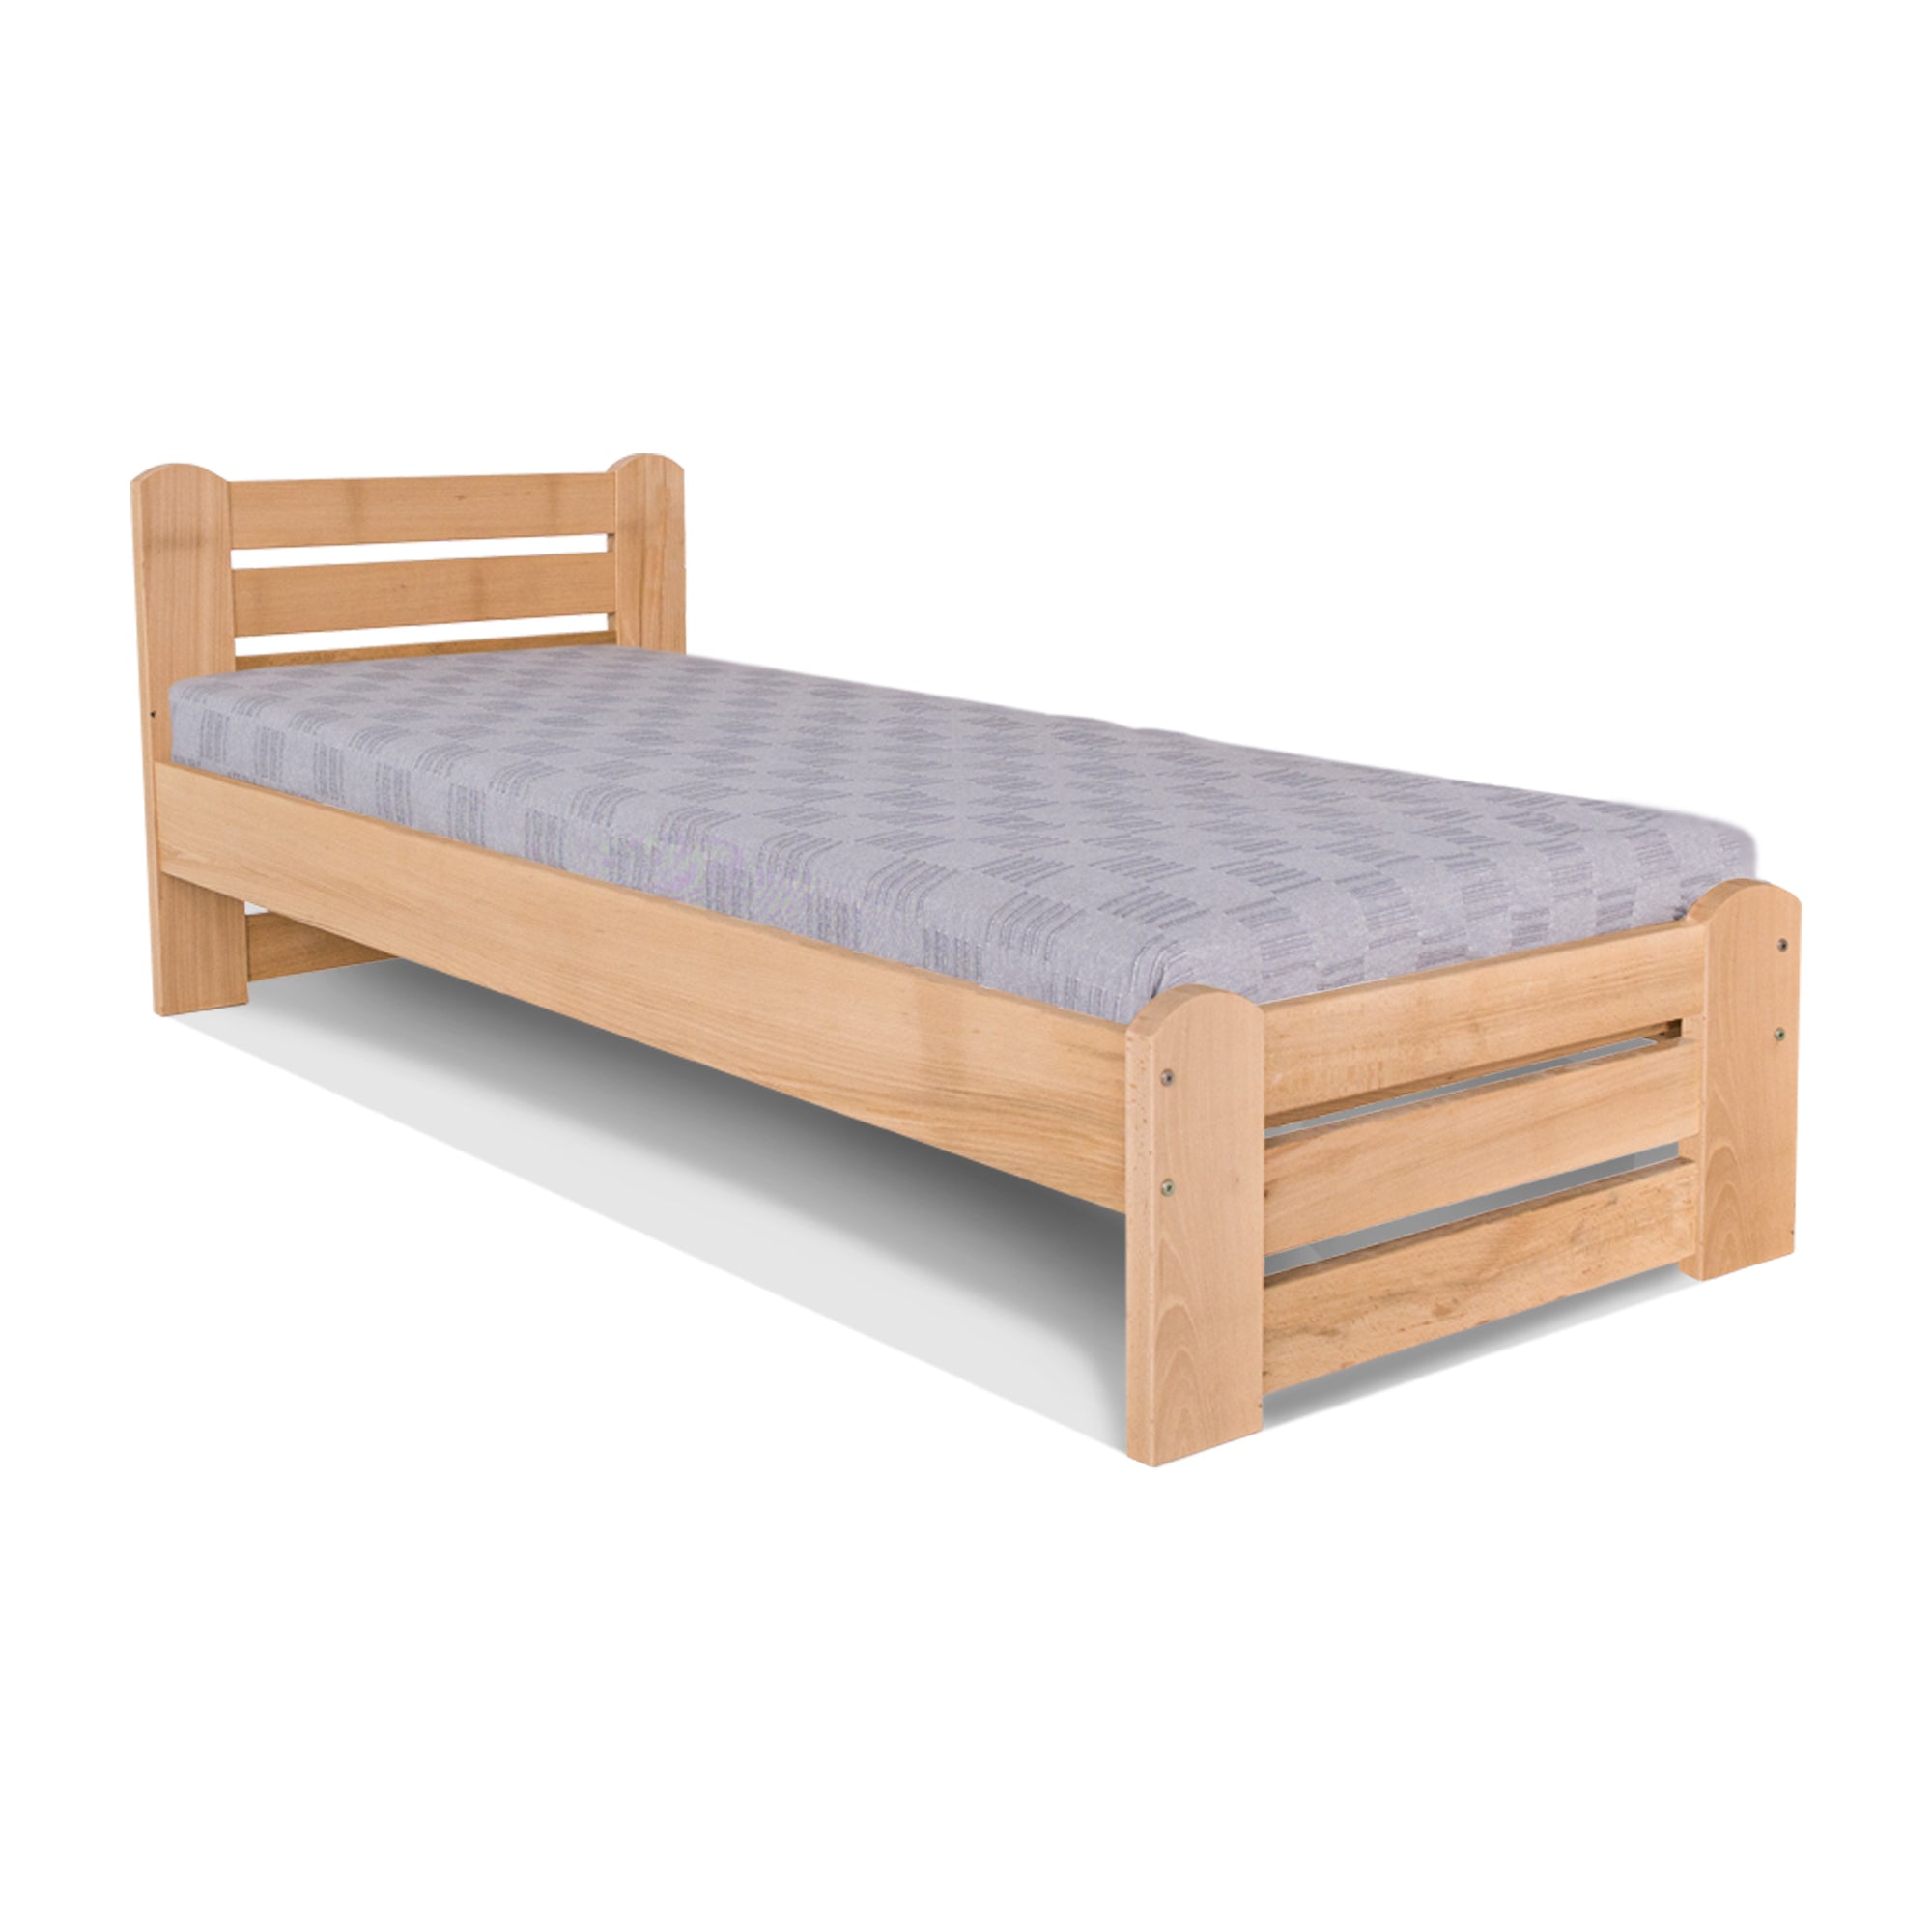 COUNTRY Single Bed, Beech Wood-natural frame